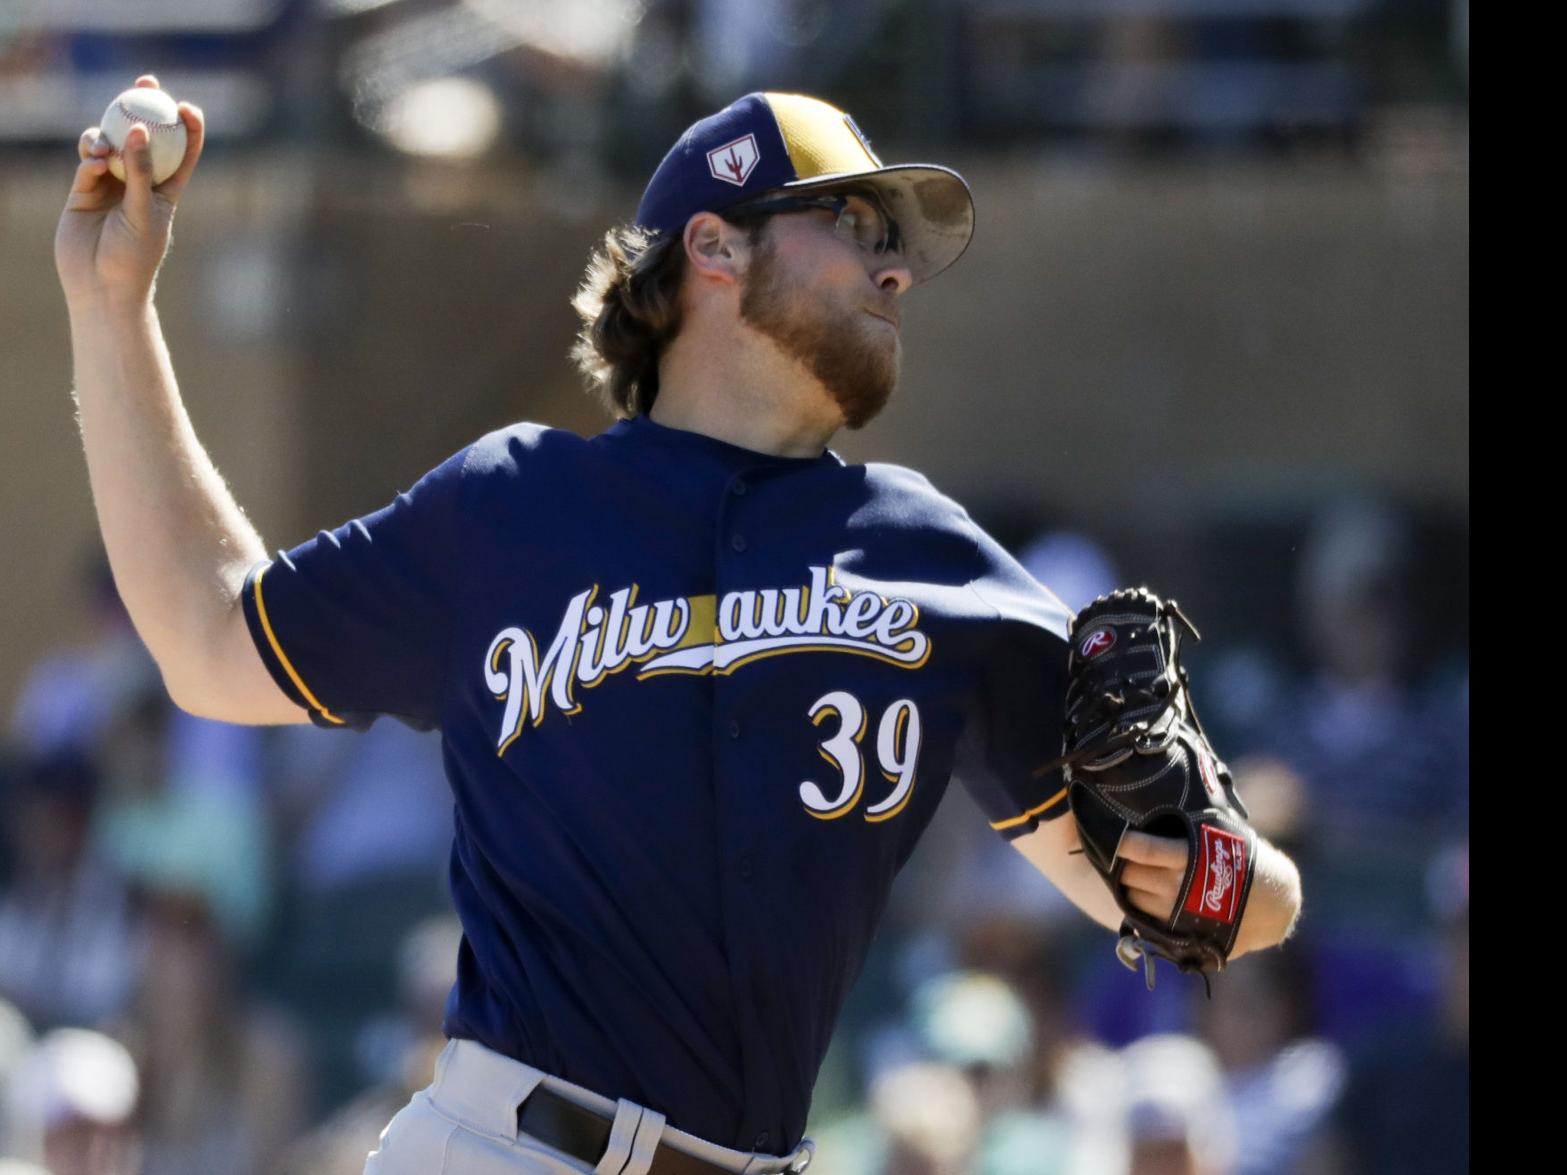 Barring setbacks, Braun should be on Brewers' opening-day roster